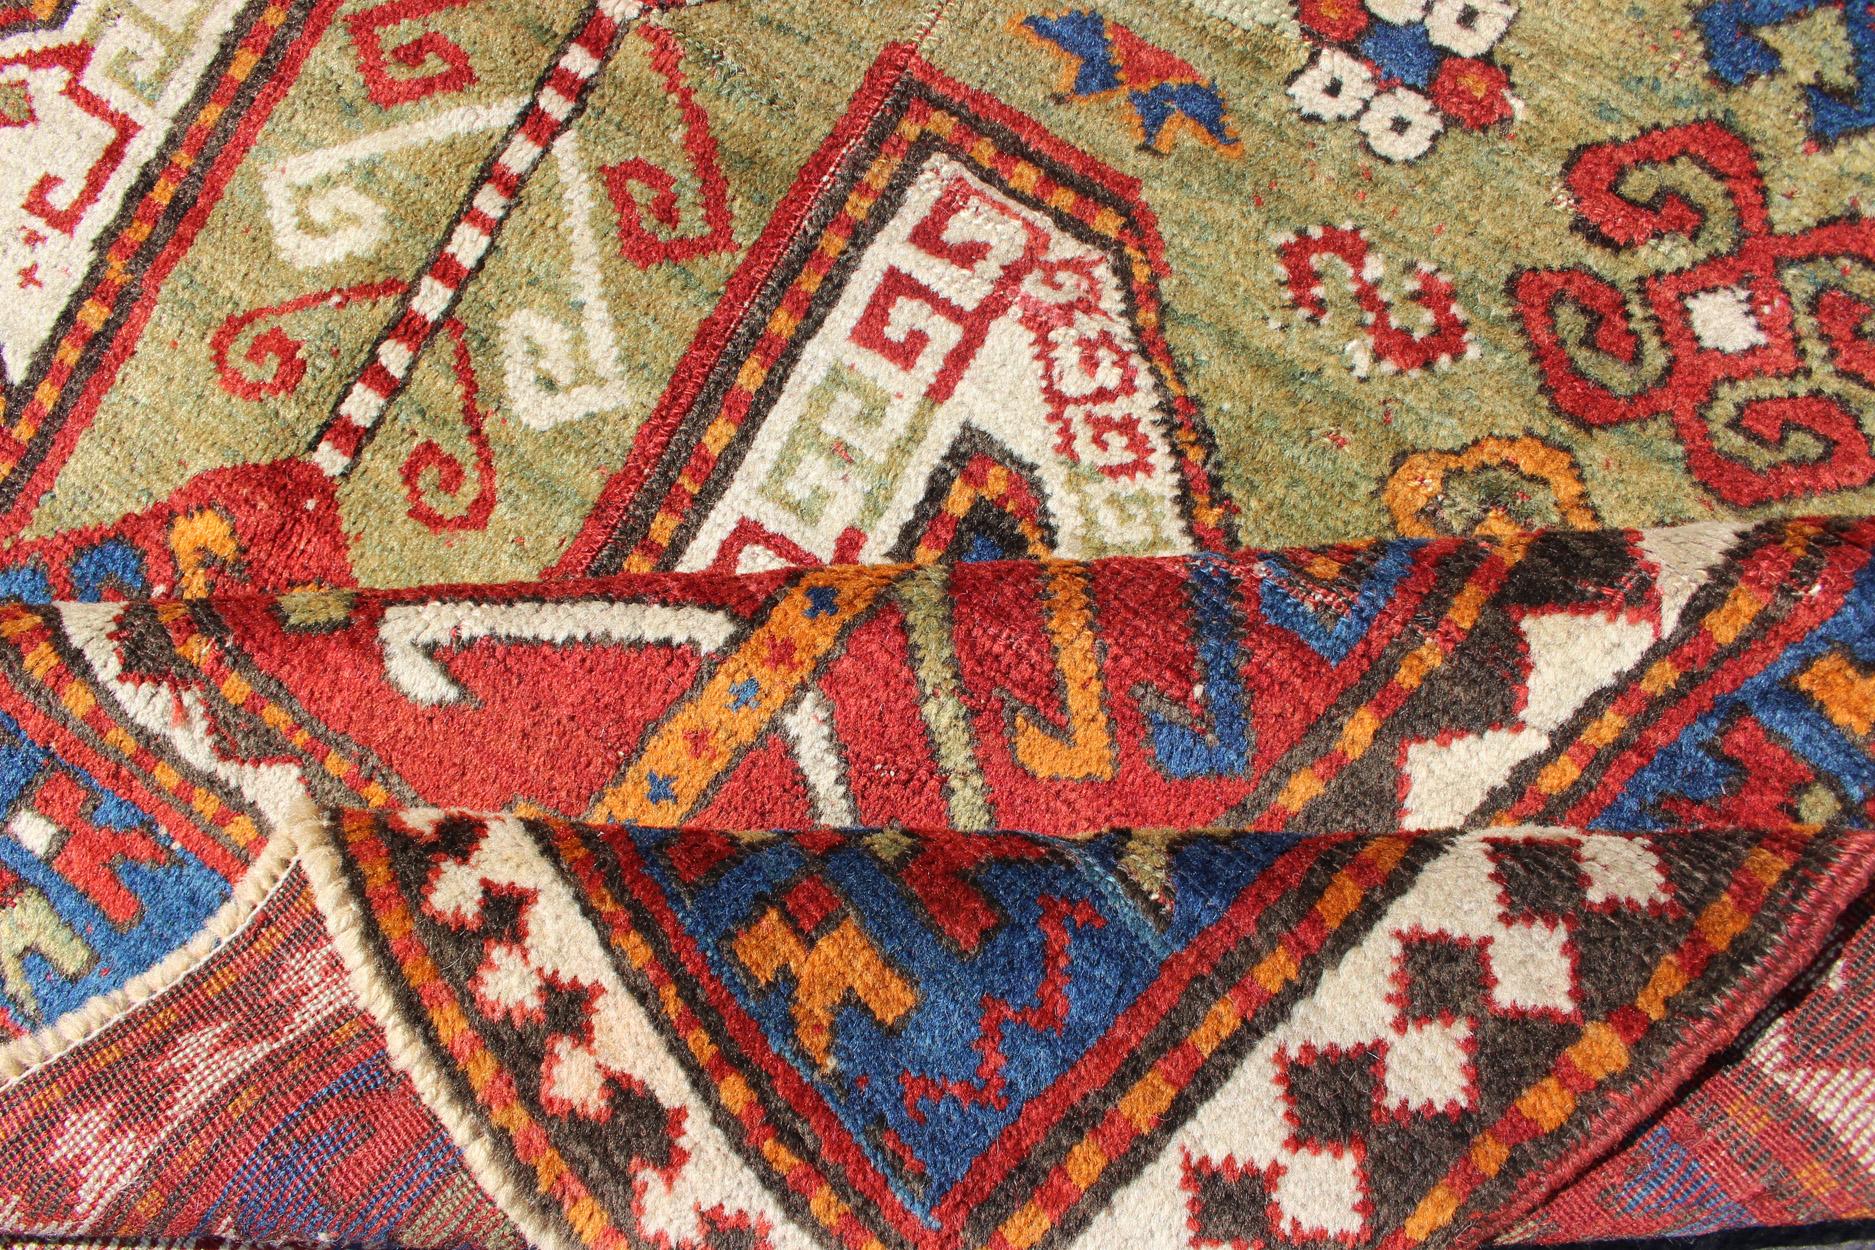 Antique Caucasian Sewan Kazak Rug with Large-Scale Tribal Design in Red & Green In Excellent Condition For Sale In Atlanta, GA